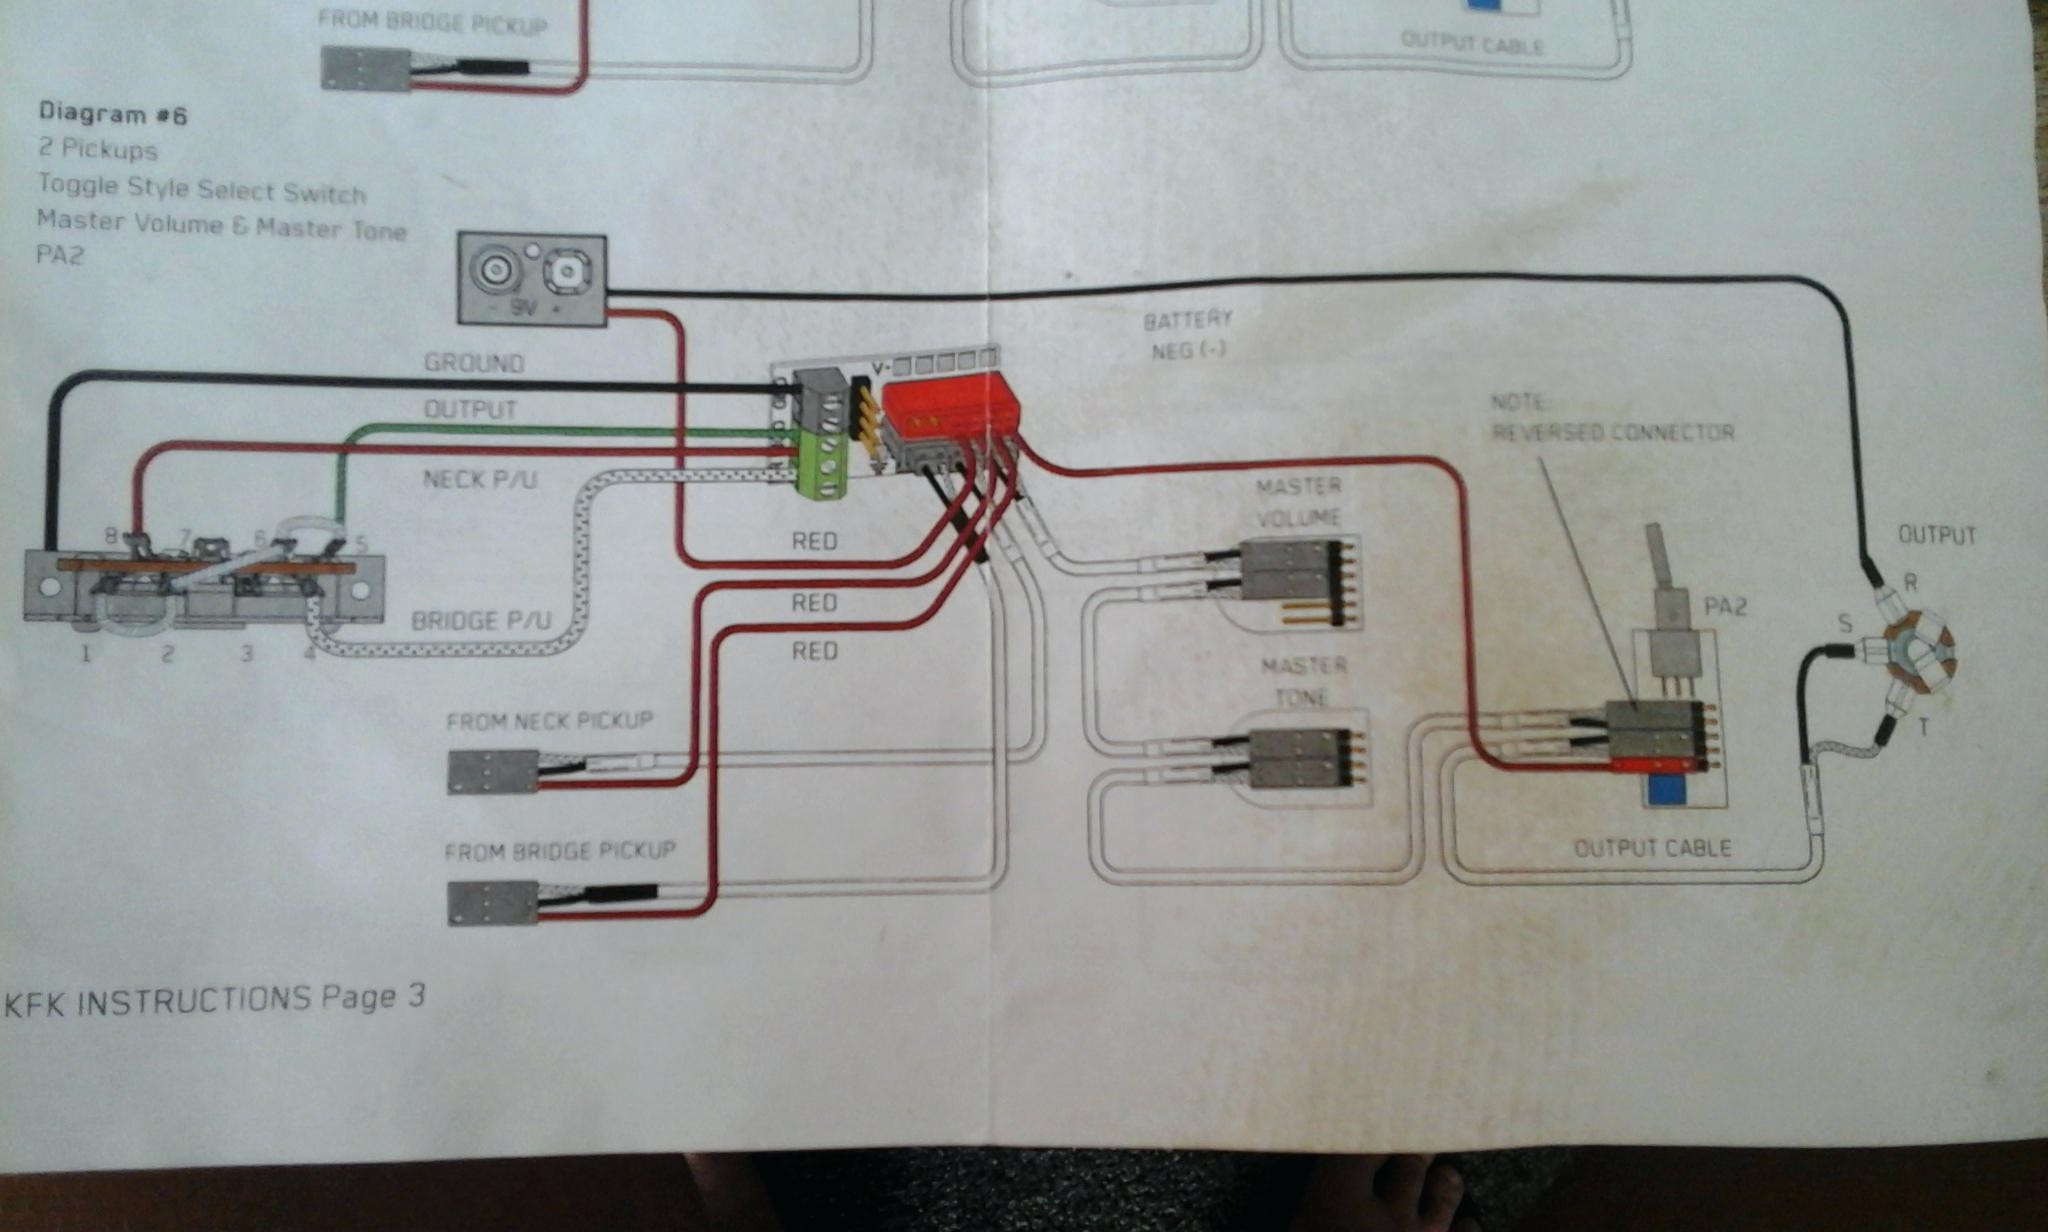 Full Size of Emg 81 85 Wiring Diagram 5 Way With Blueprint Diagrams Archived